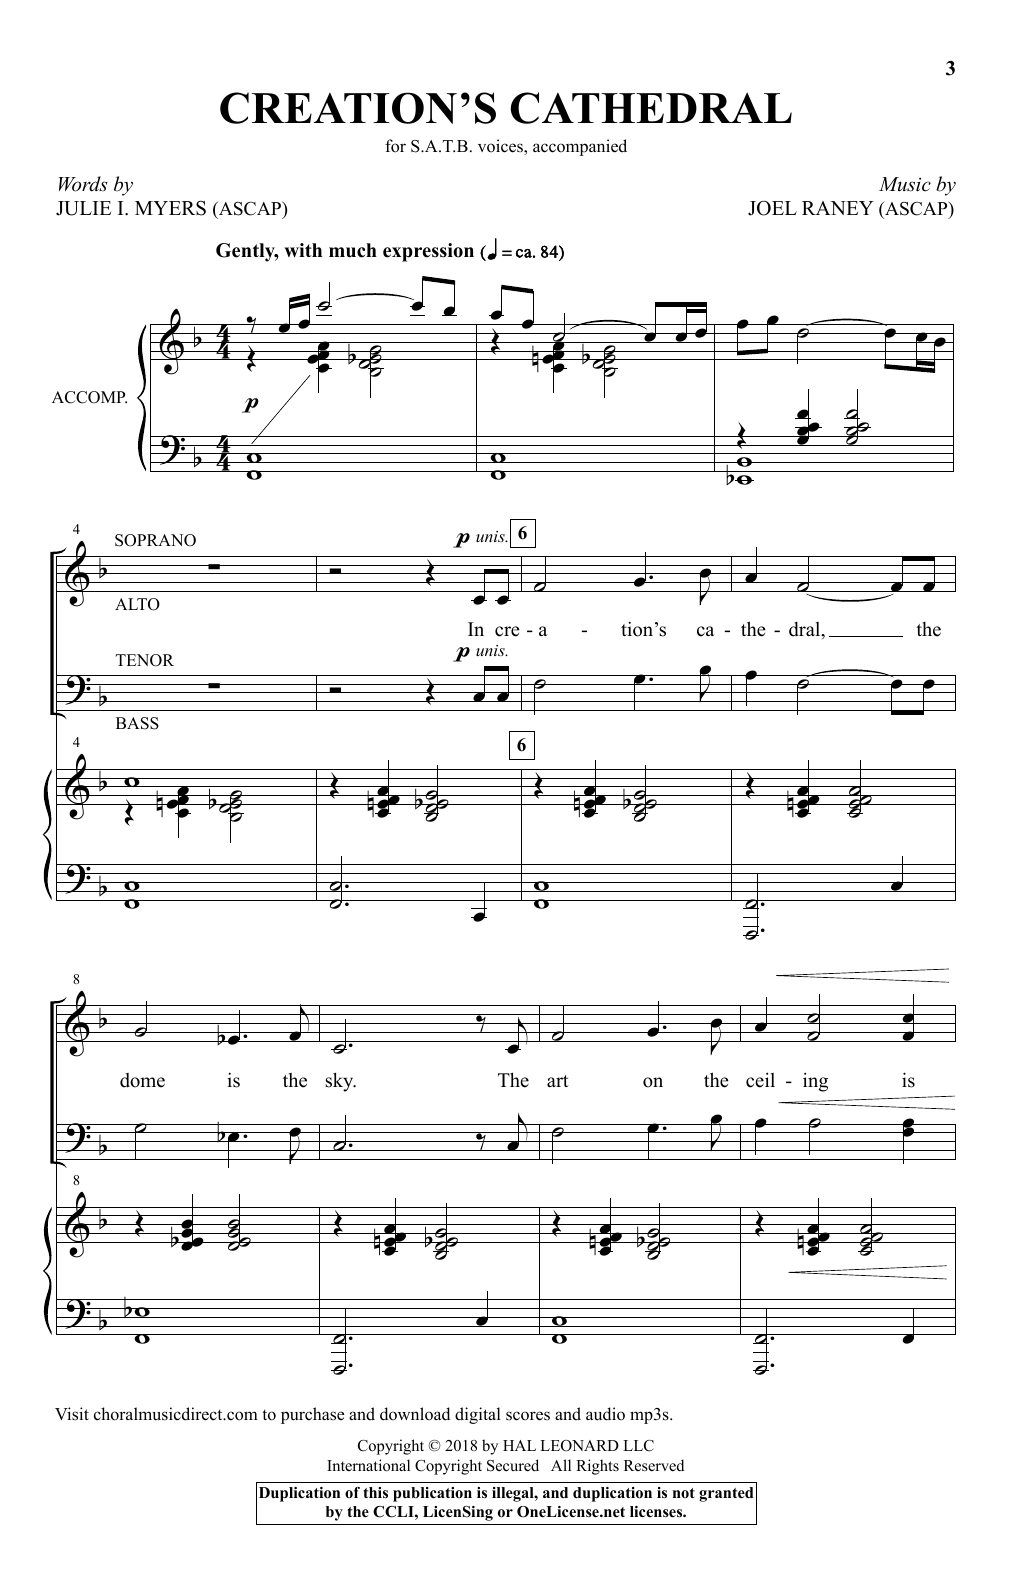 Download Joel Raney Creation's Cathedral Sheet Music